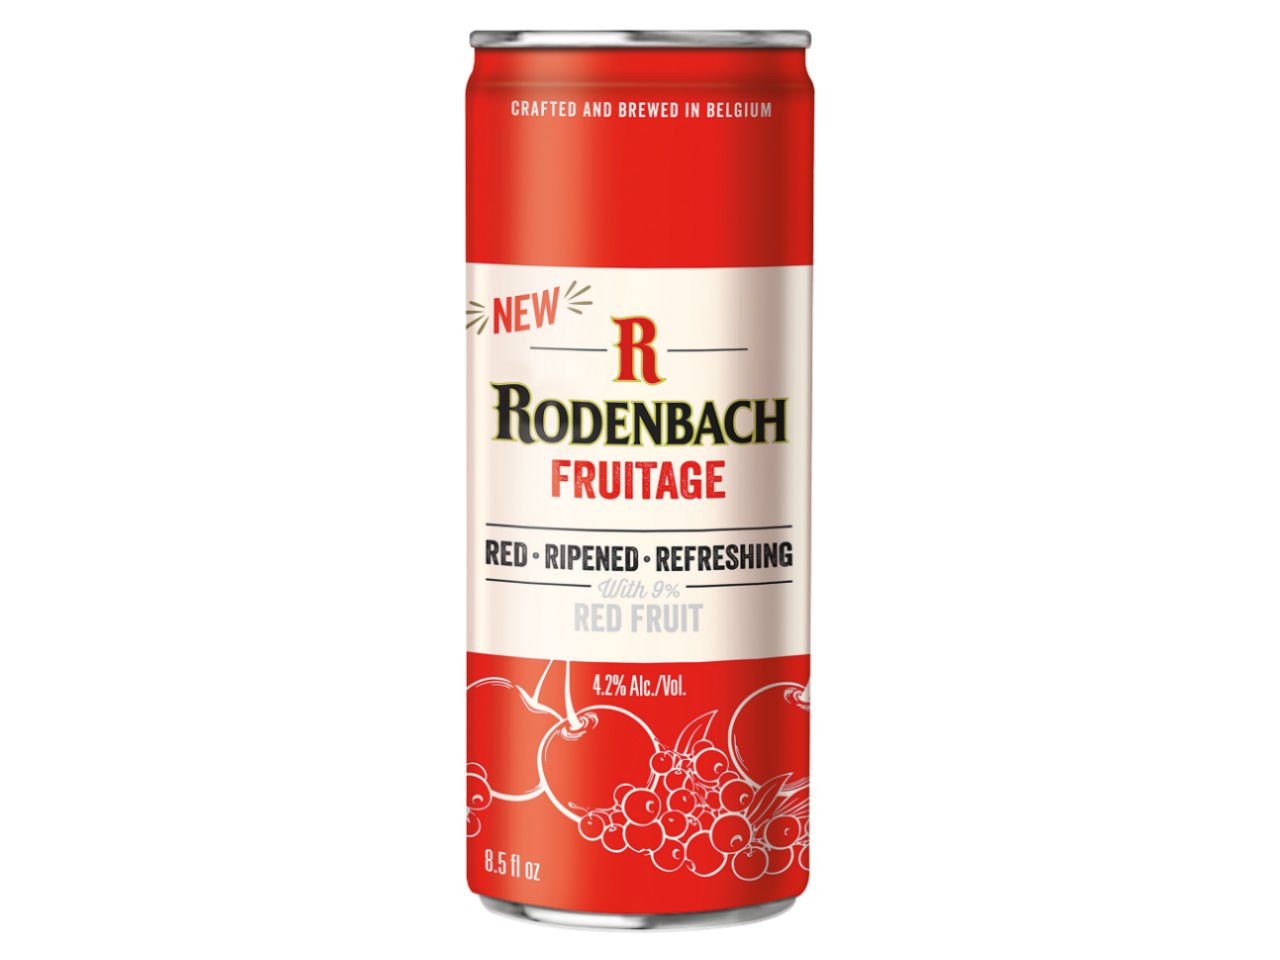 Rodenbach Brewery fruitage in red can